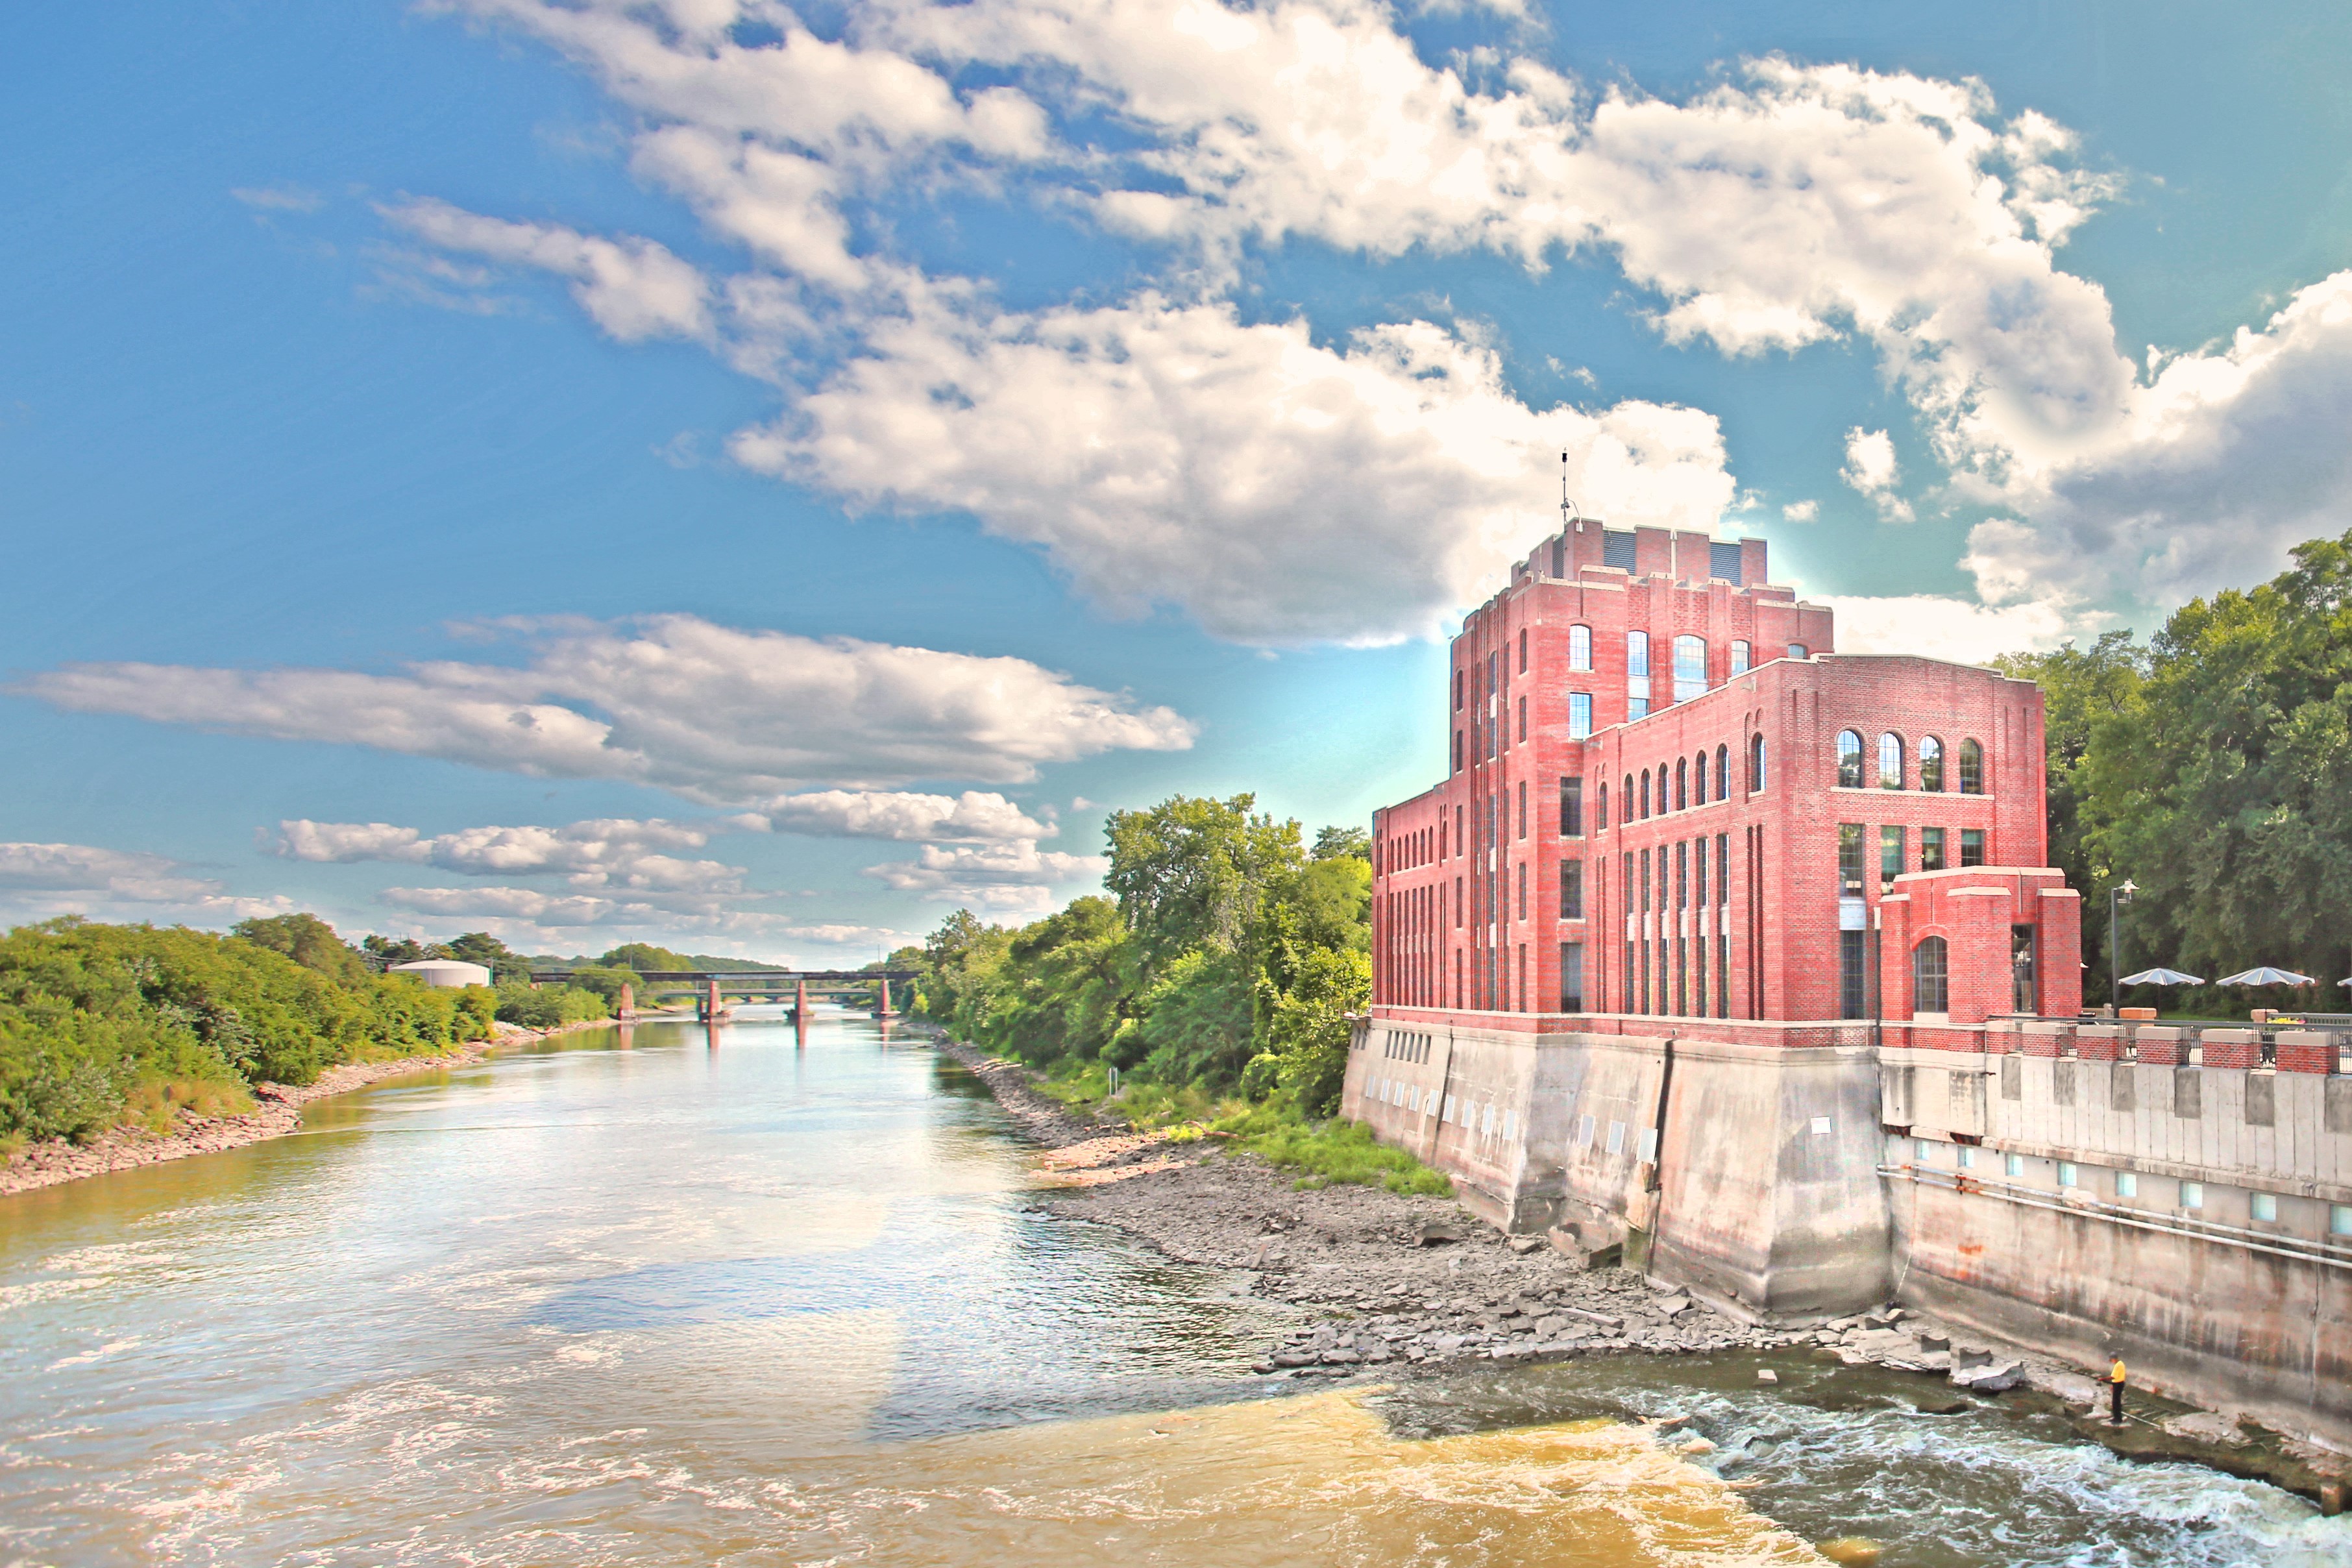 Looking over the Iowa River at the historic C. Maxwell Stanley Hydraulics Lab